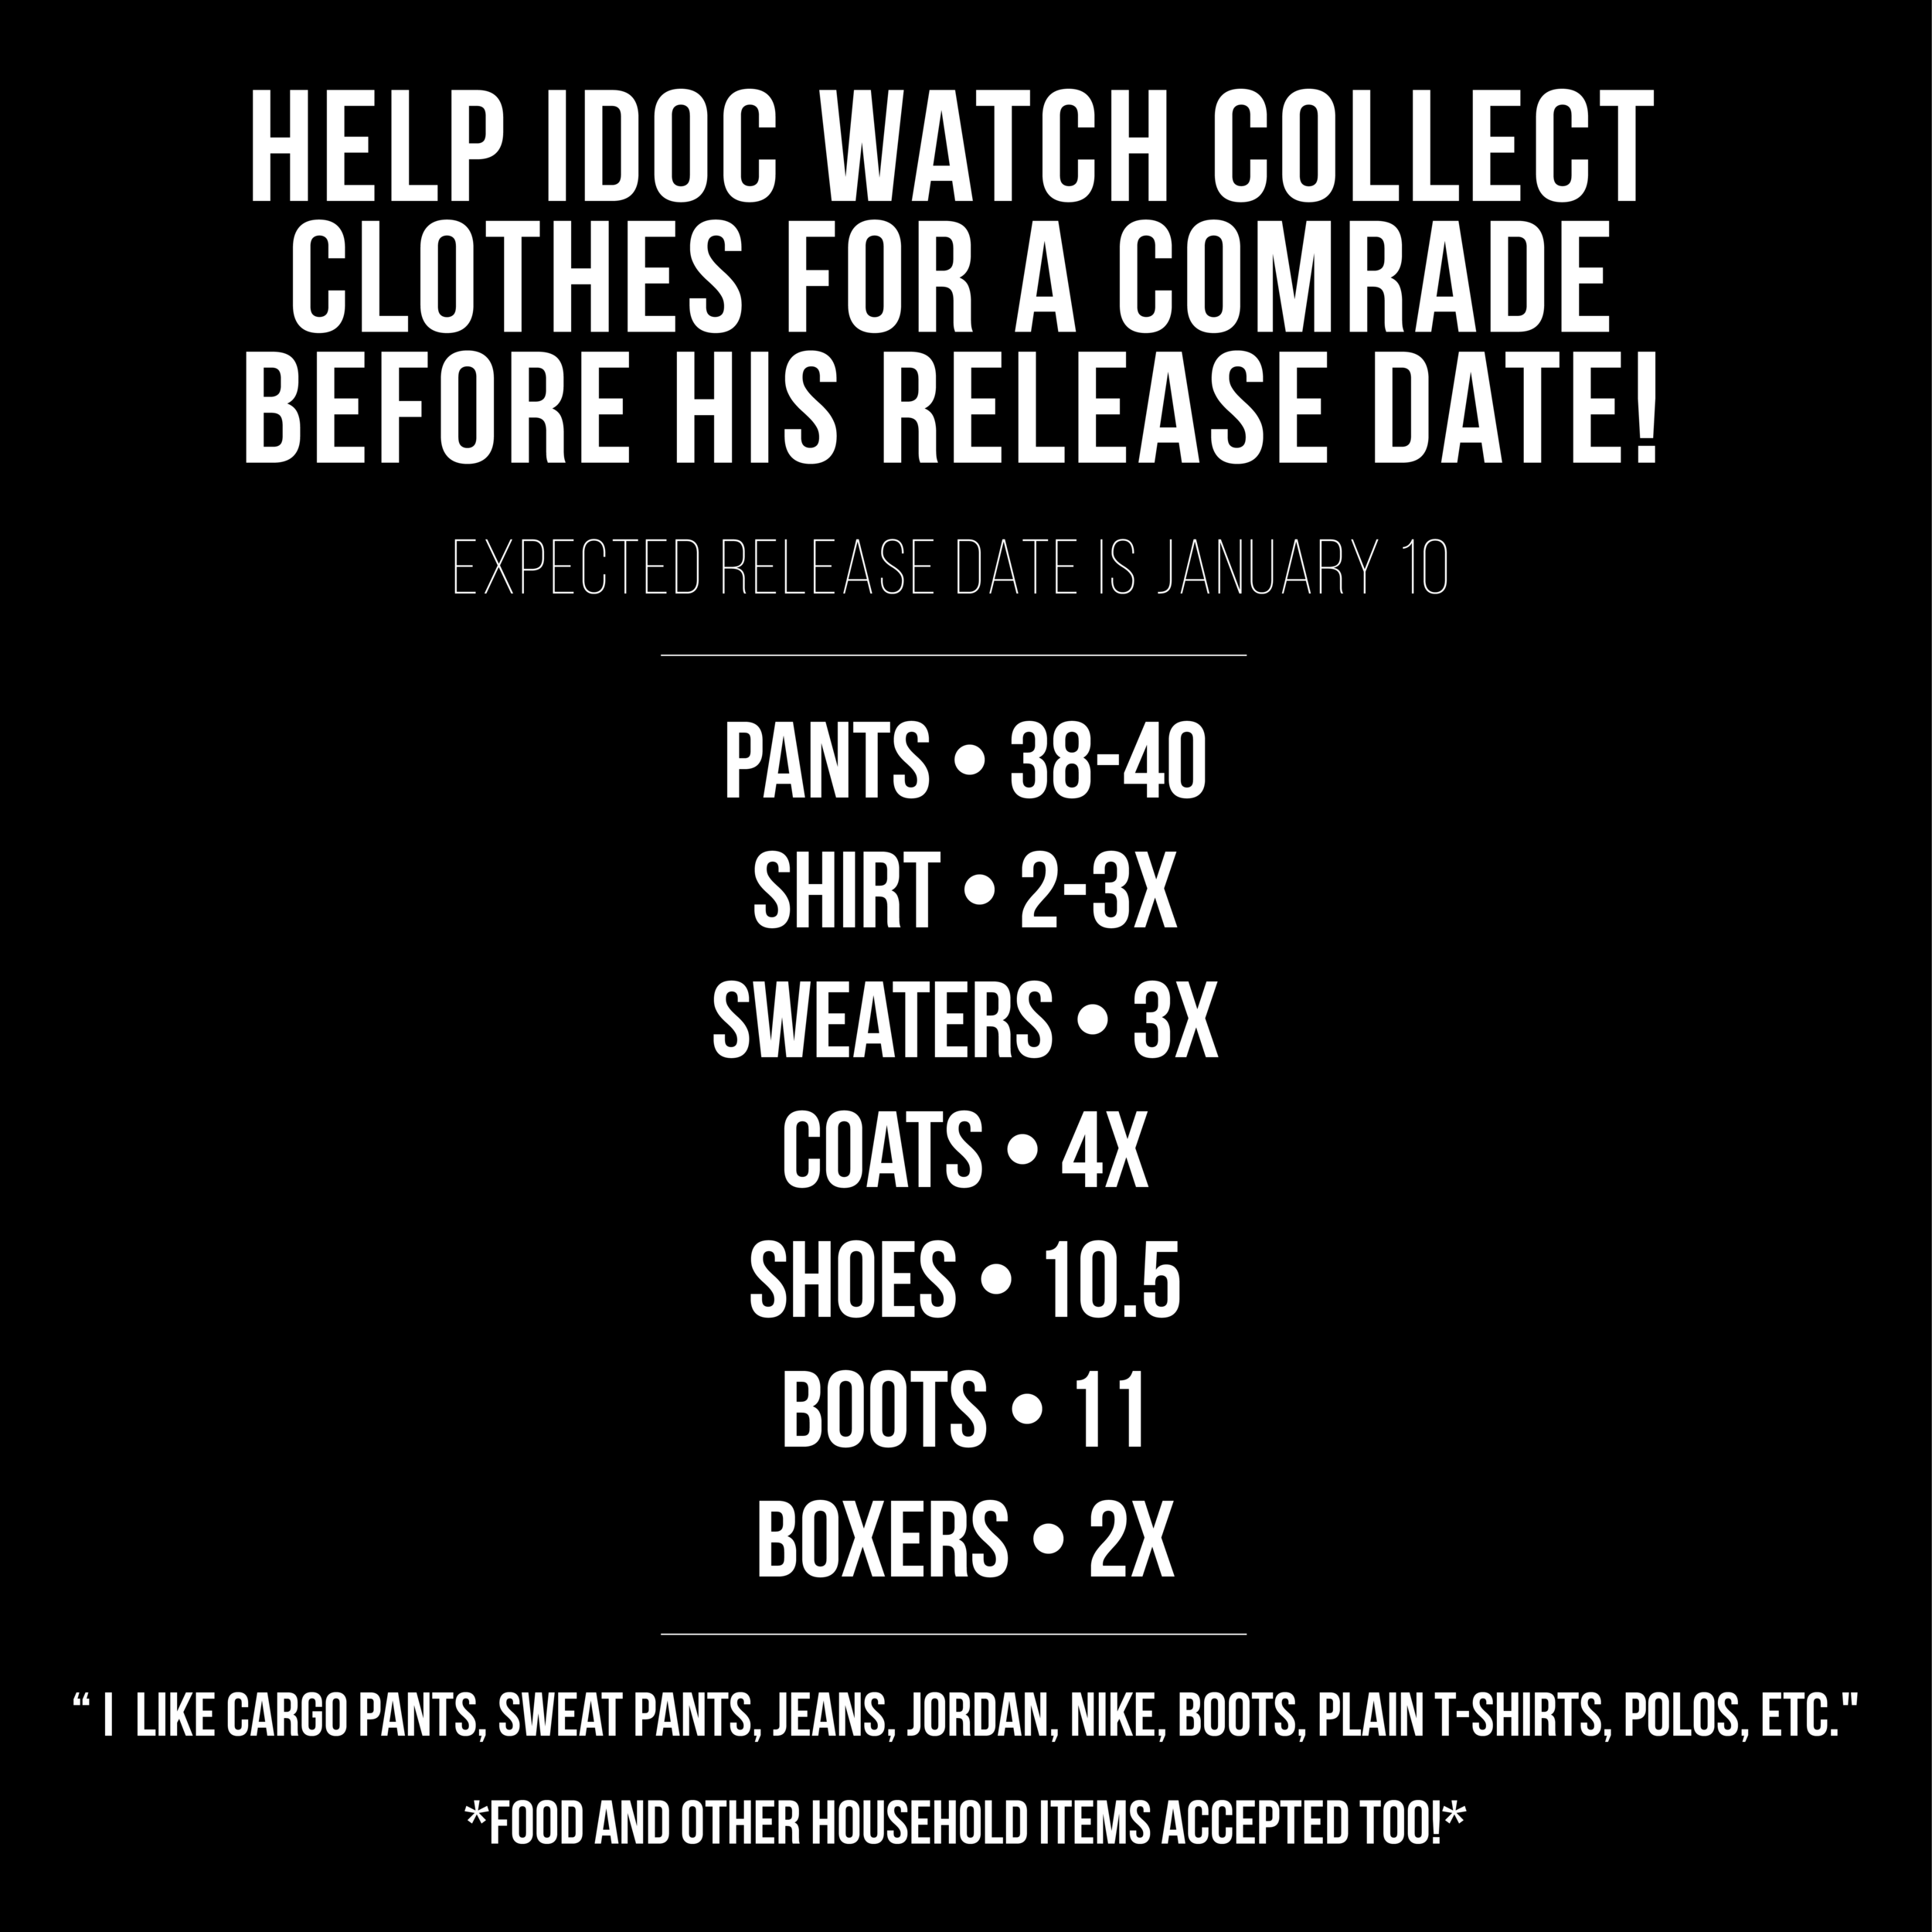 idocwatch clothes collection.png